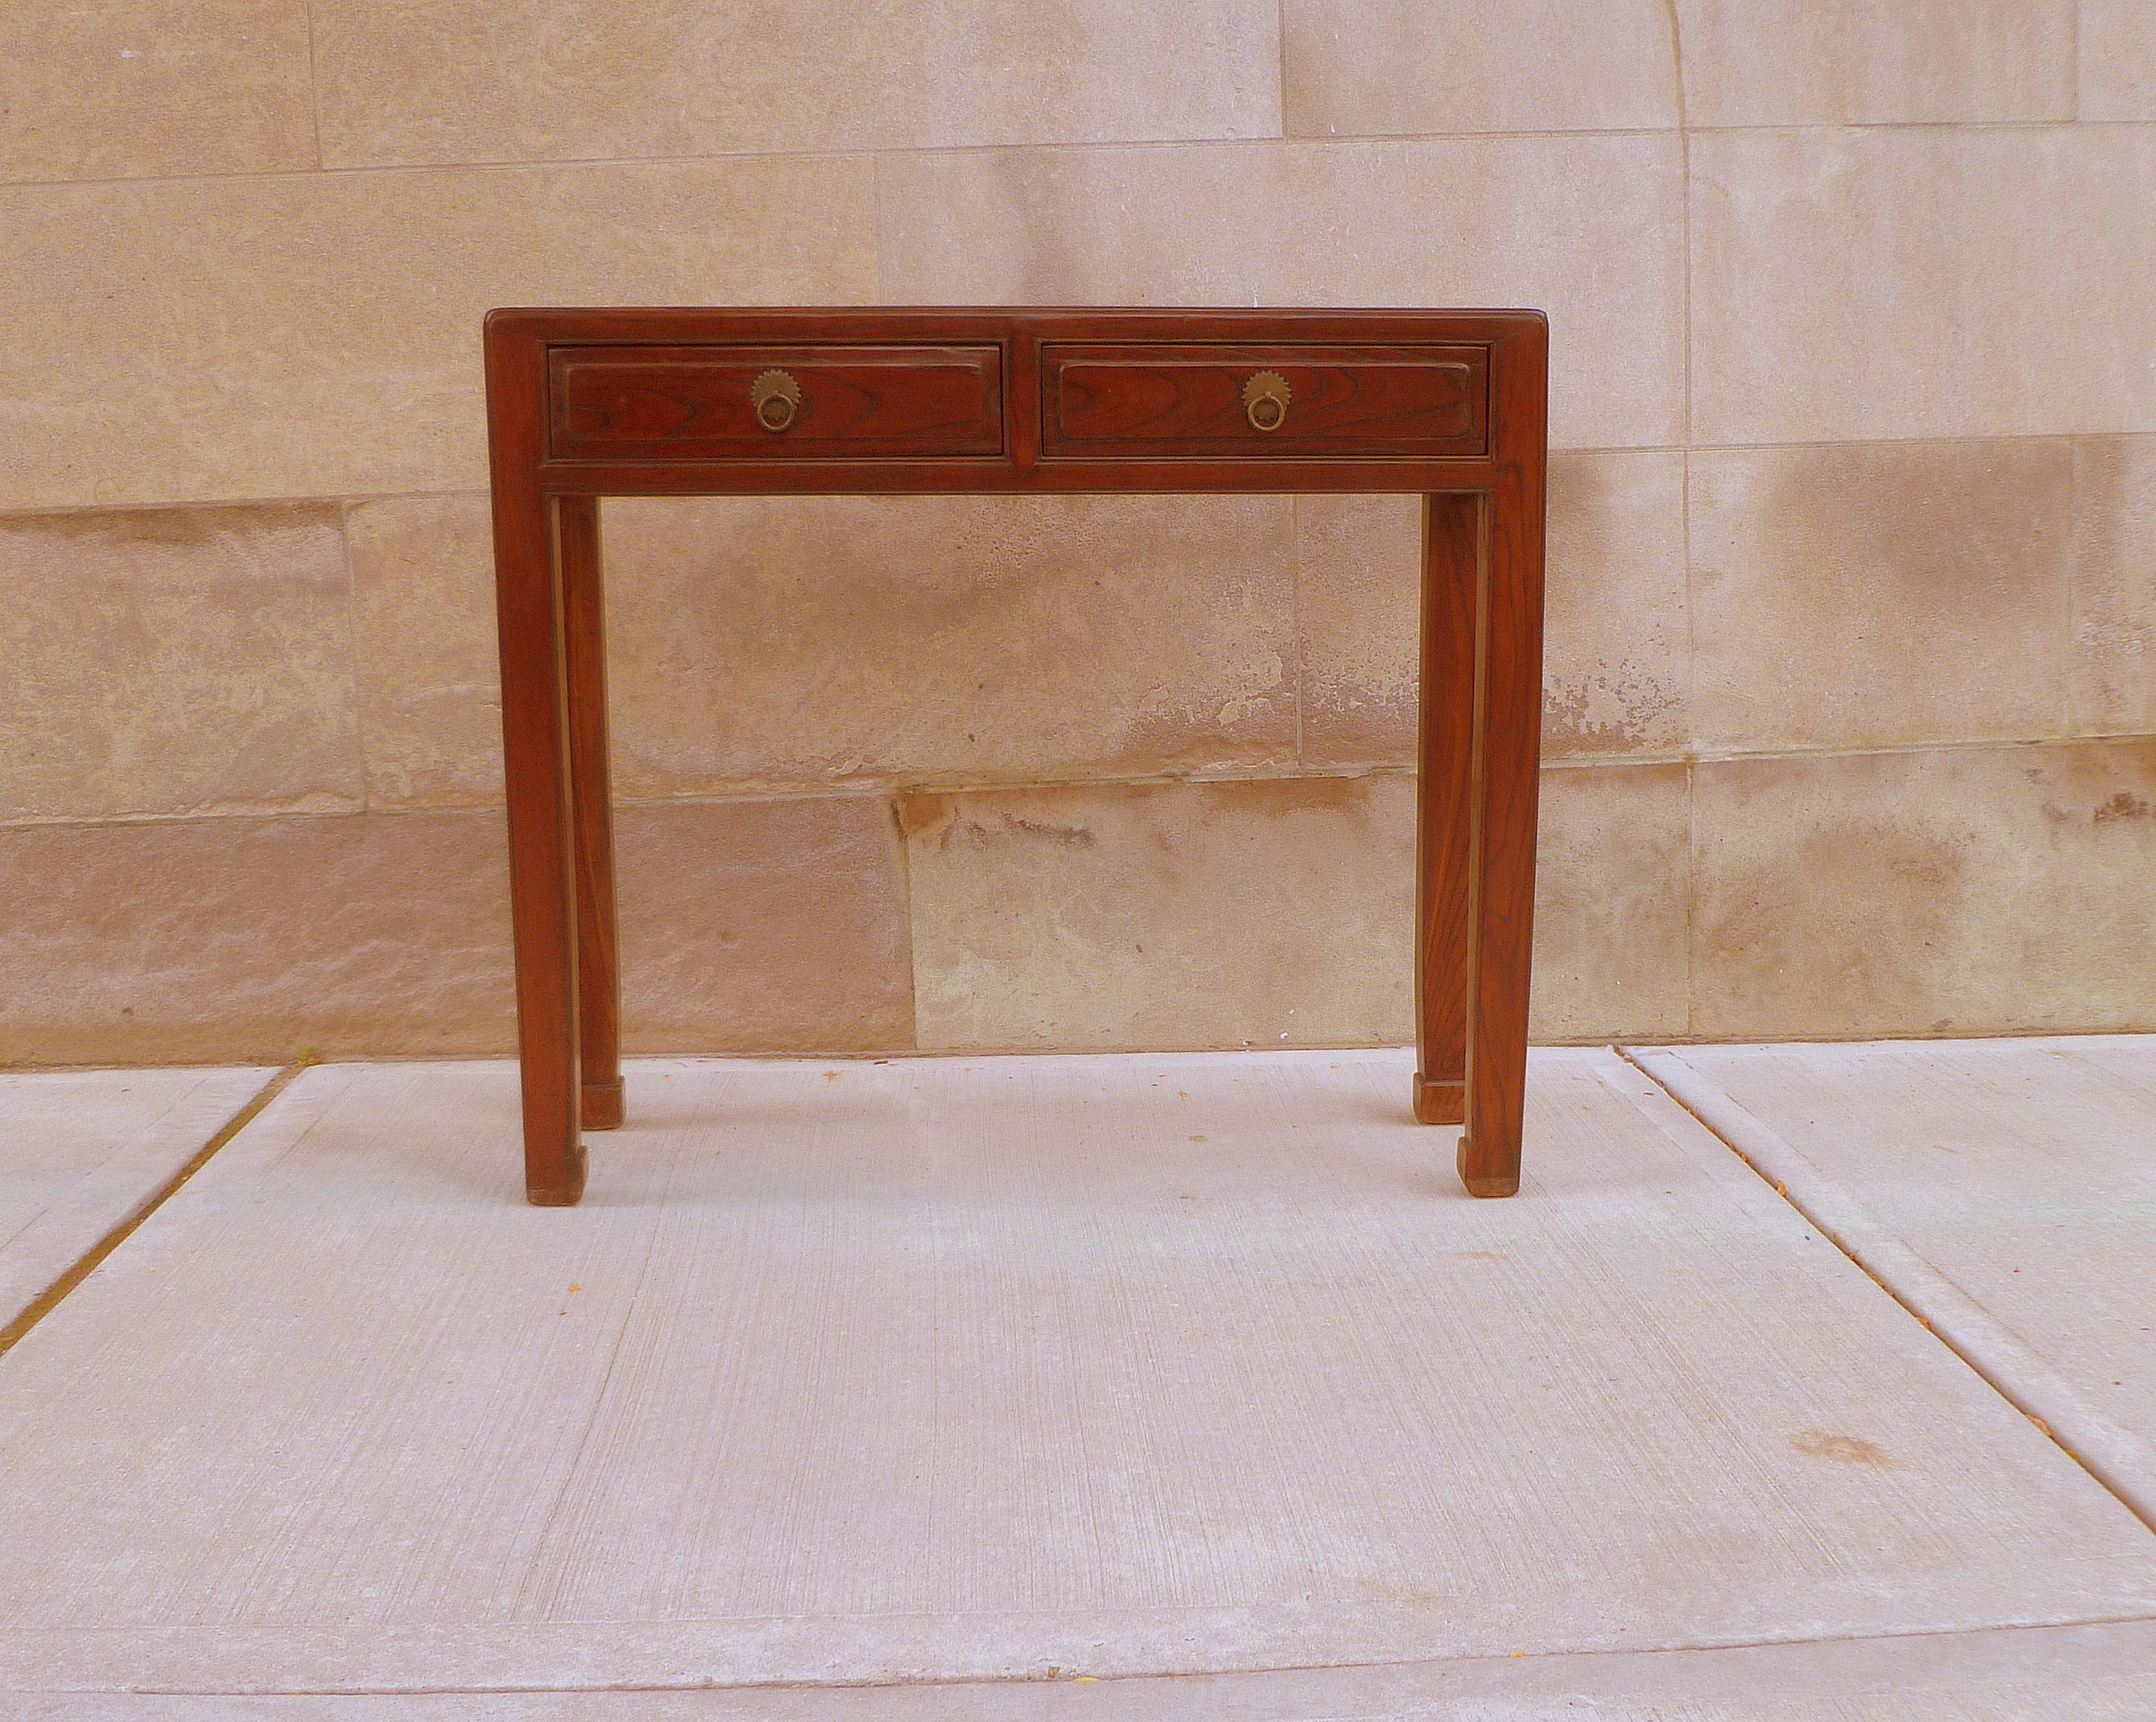 Fine Jumu wood console table with four drawers and brass fitting. Simple and elegant form. We carry fine quality furniture with elegant finished and has been appeared many times in 